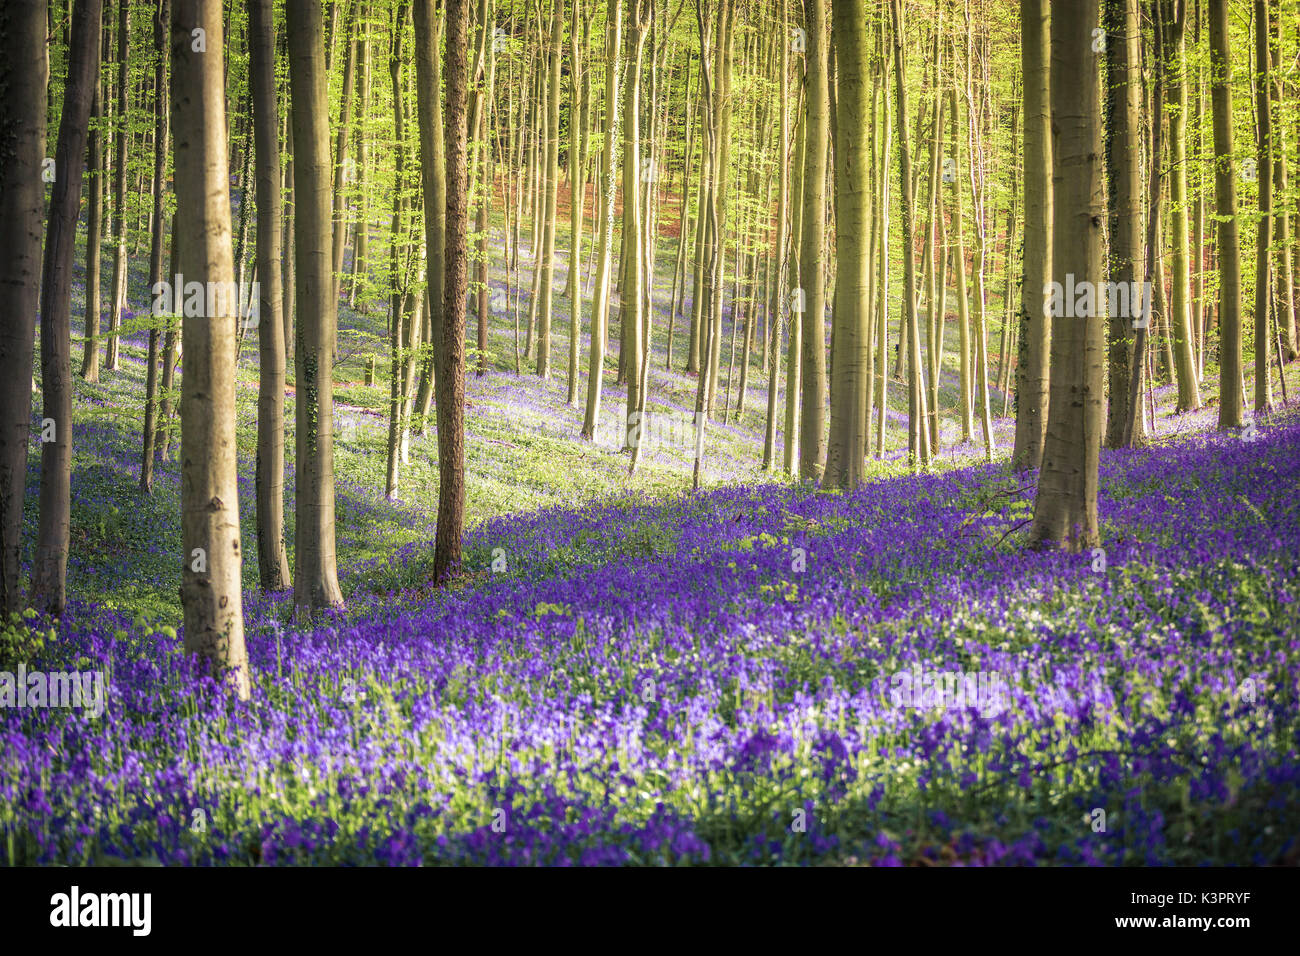 Bluebells into the Halle Forest, Halle, Bruxelles, Flandres, Belgium Stock Photo